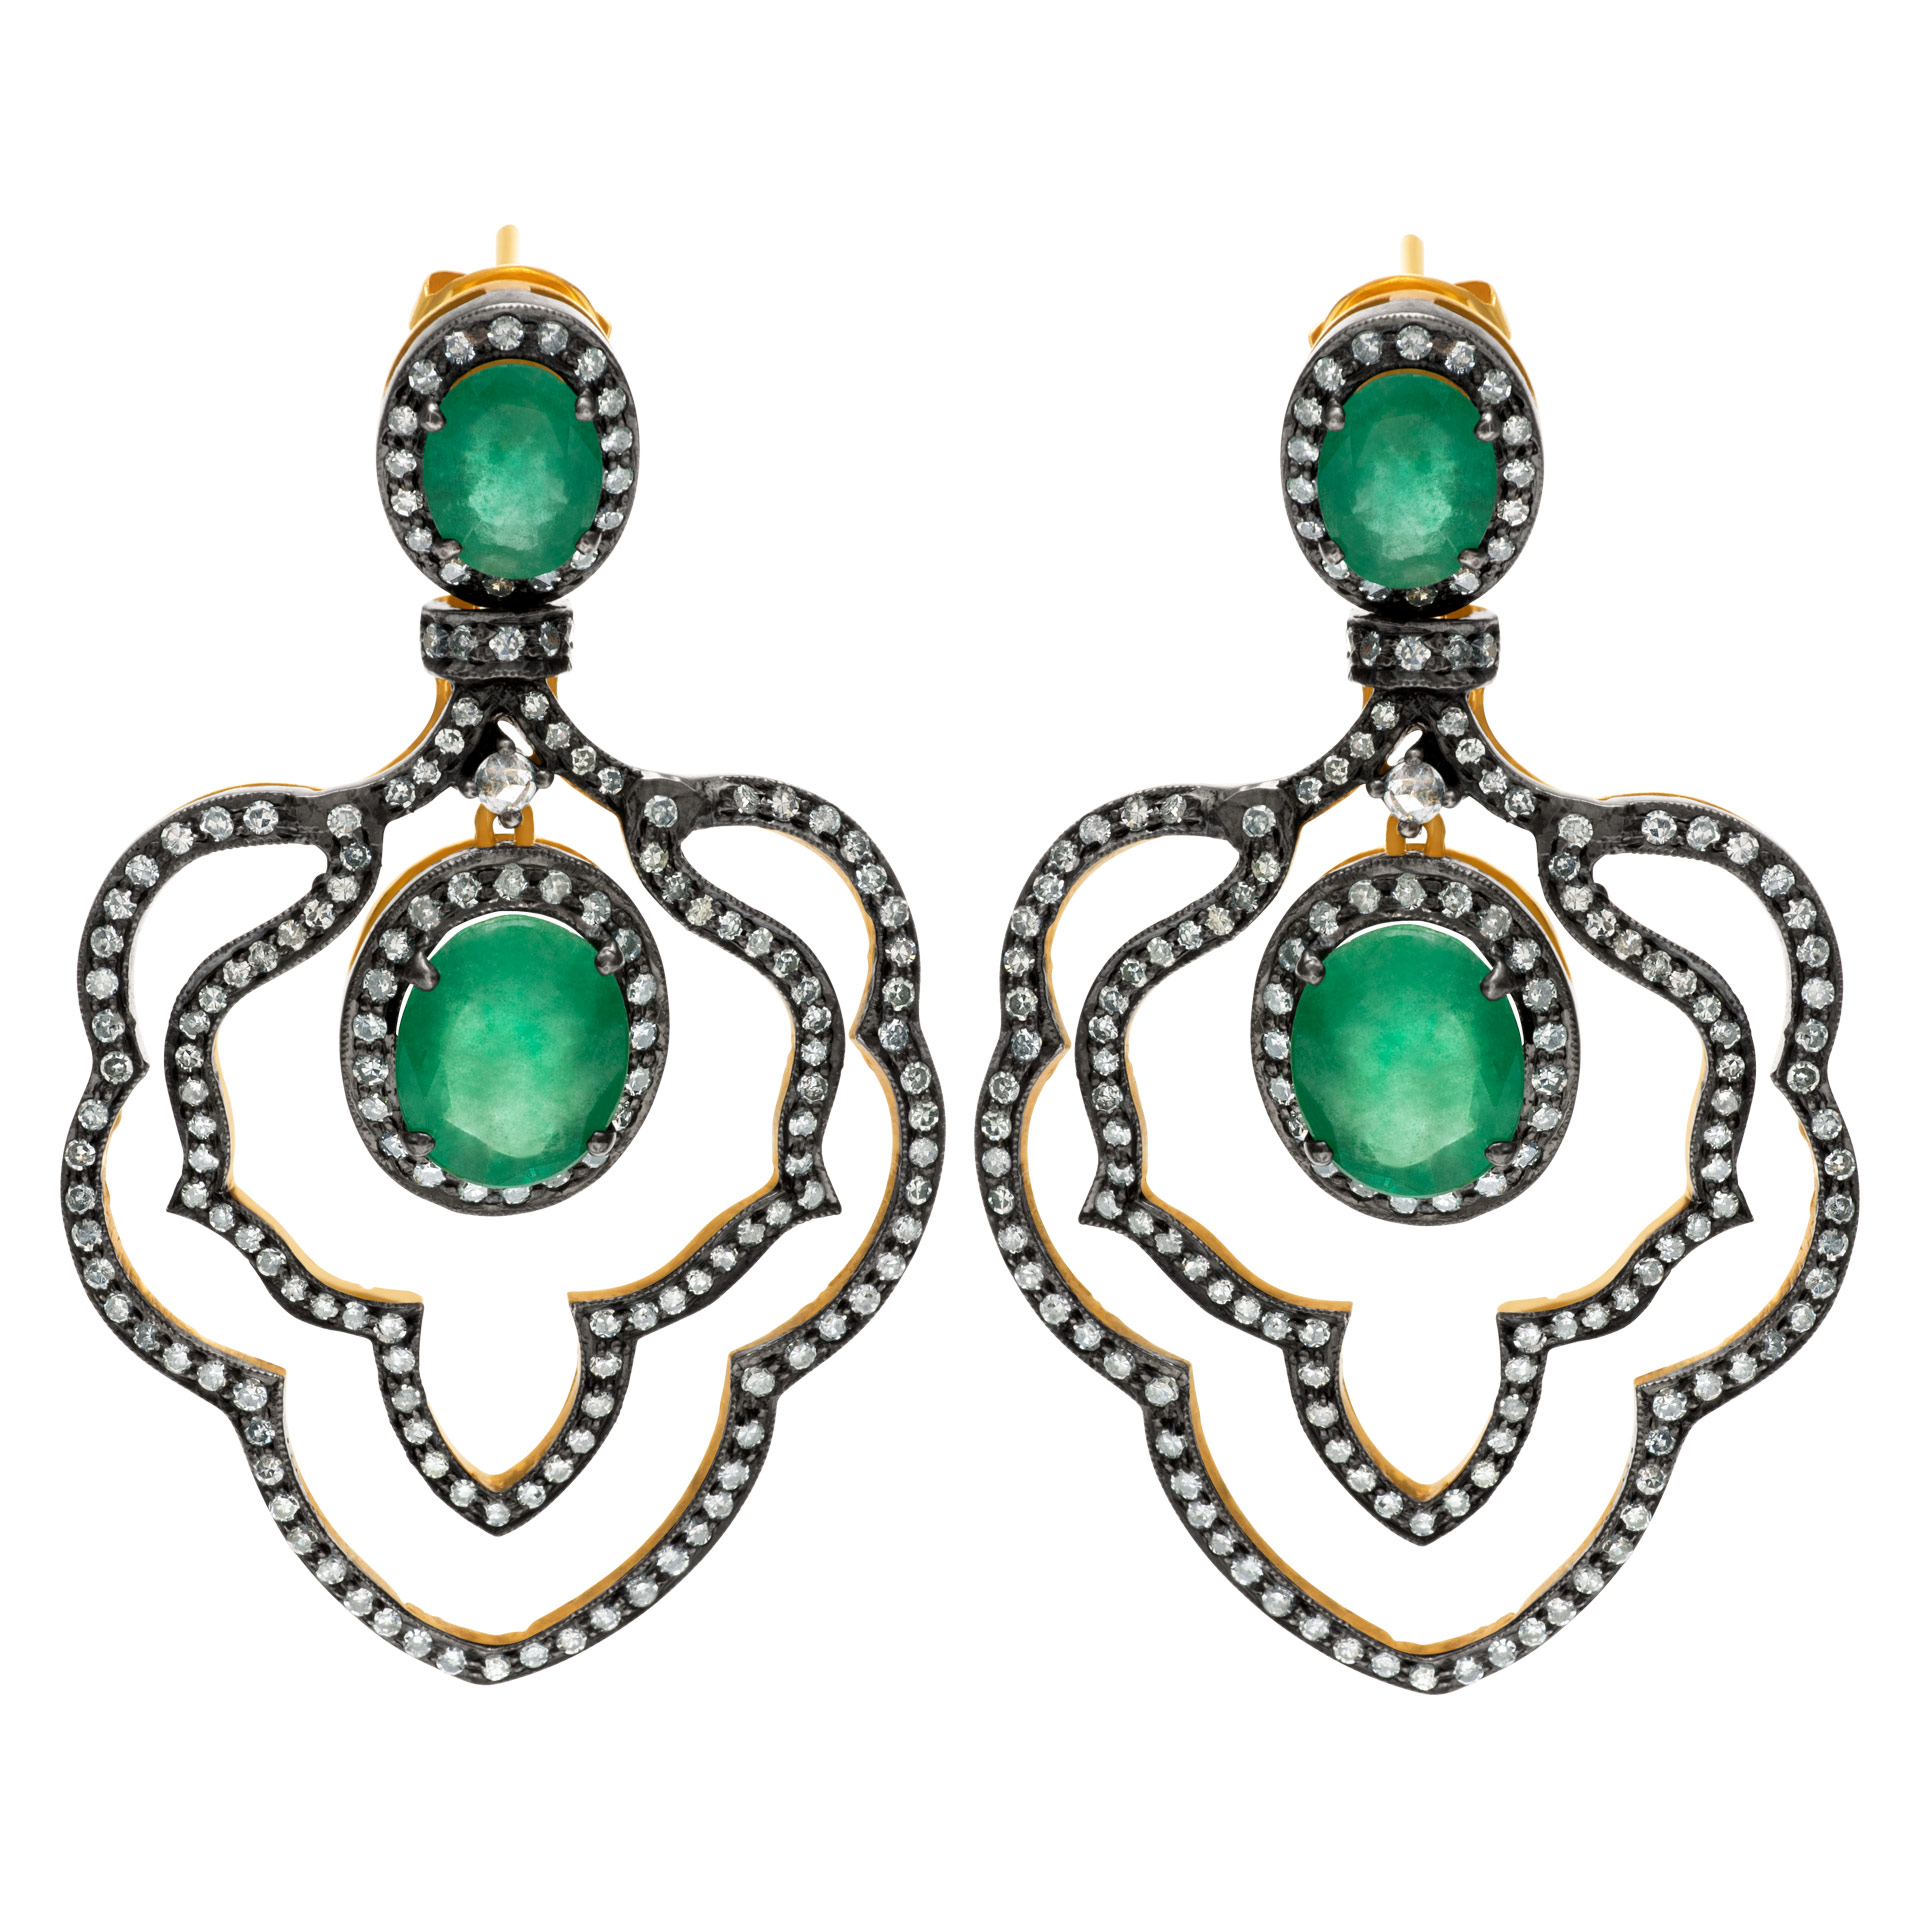 Emerald and rose cut Diamond earrings in 14K and sterling silver top